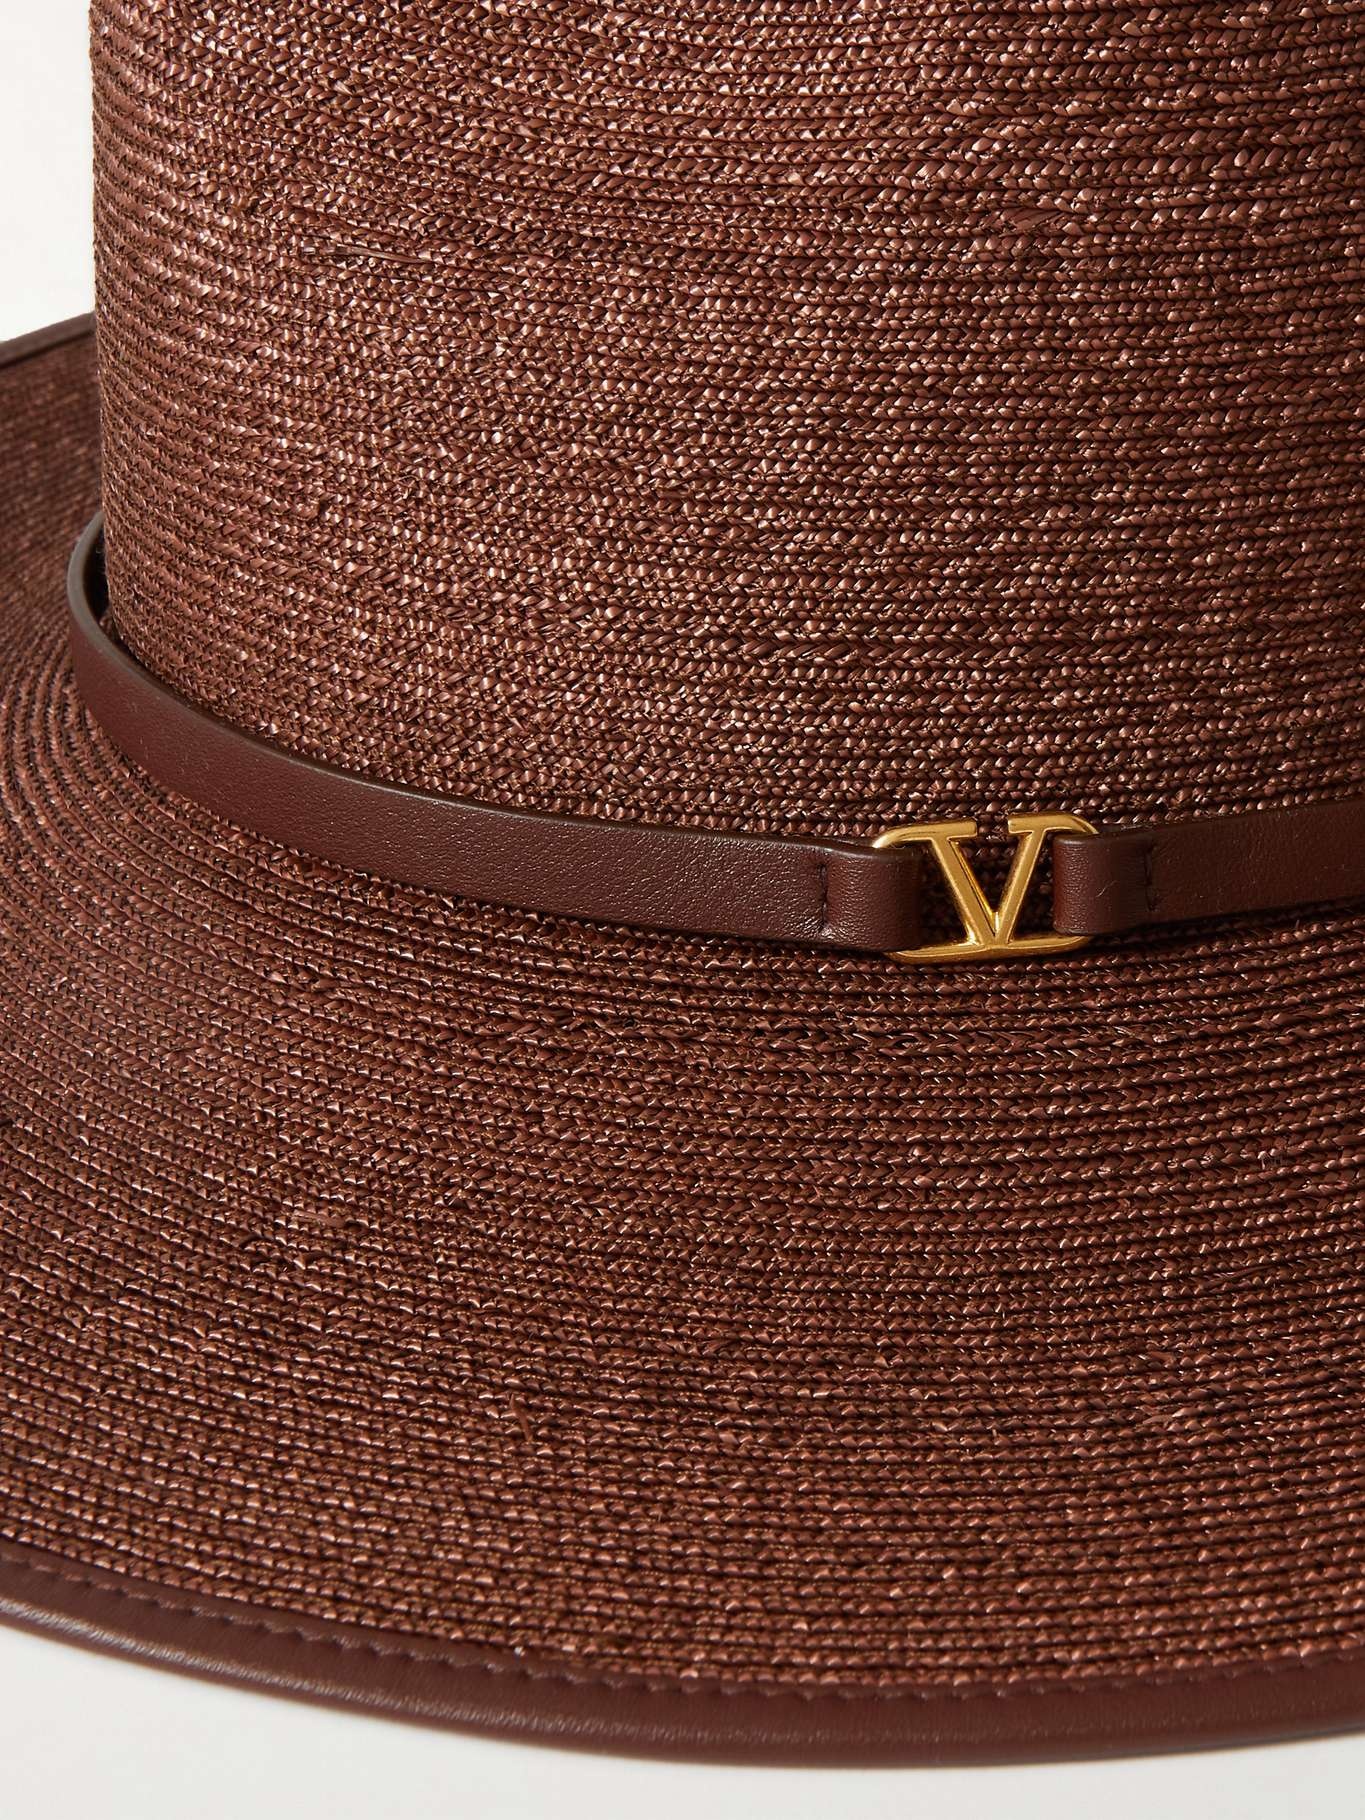 VLOGO leather-trimmed straw sunhat - 2